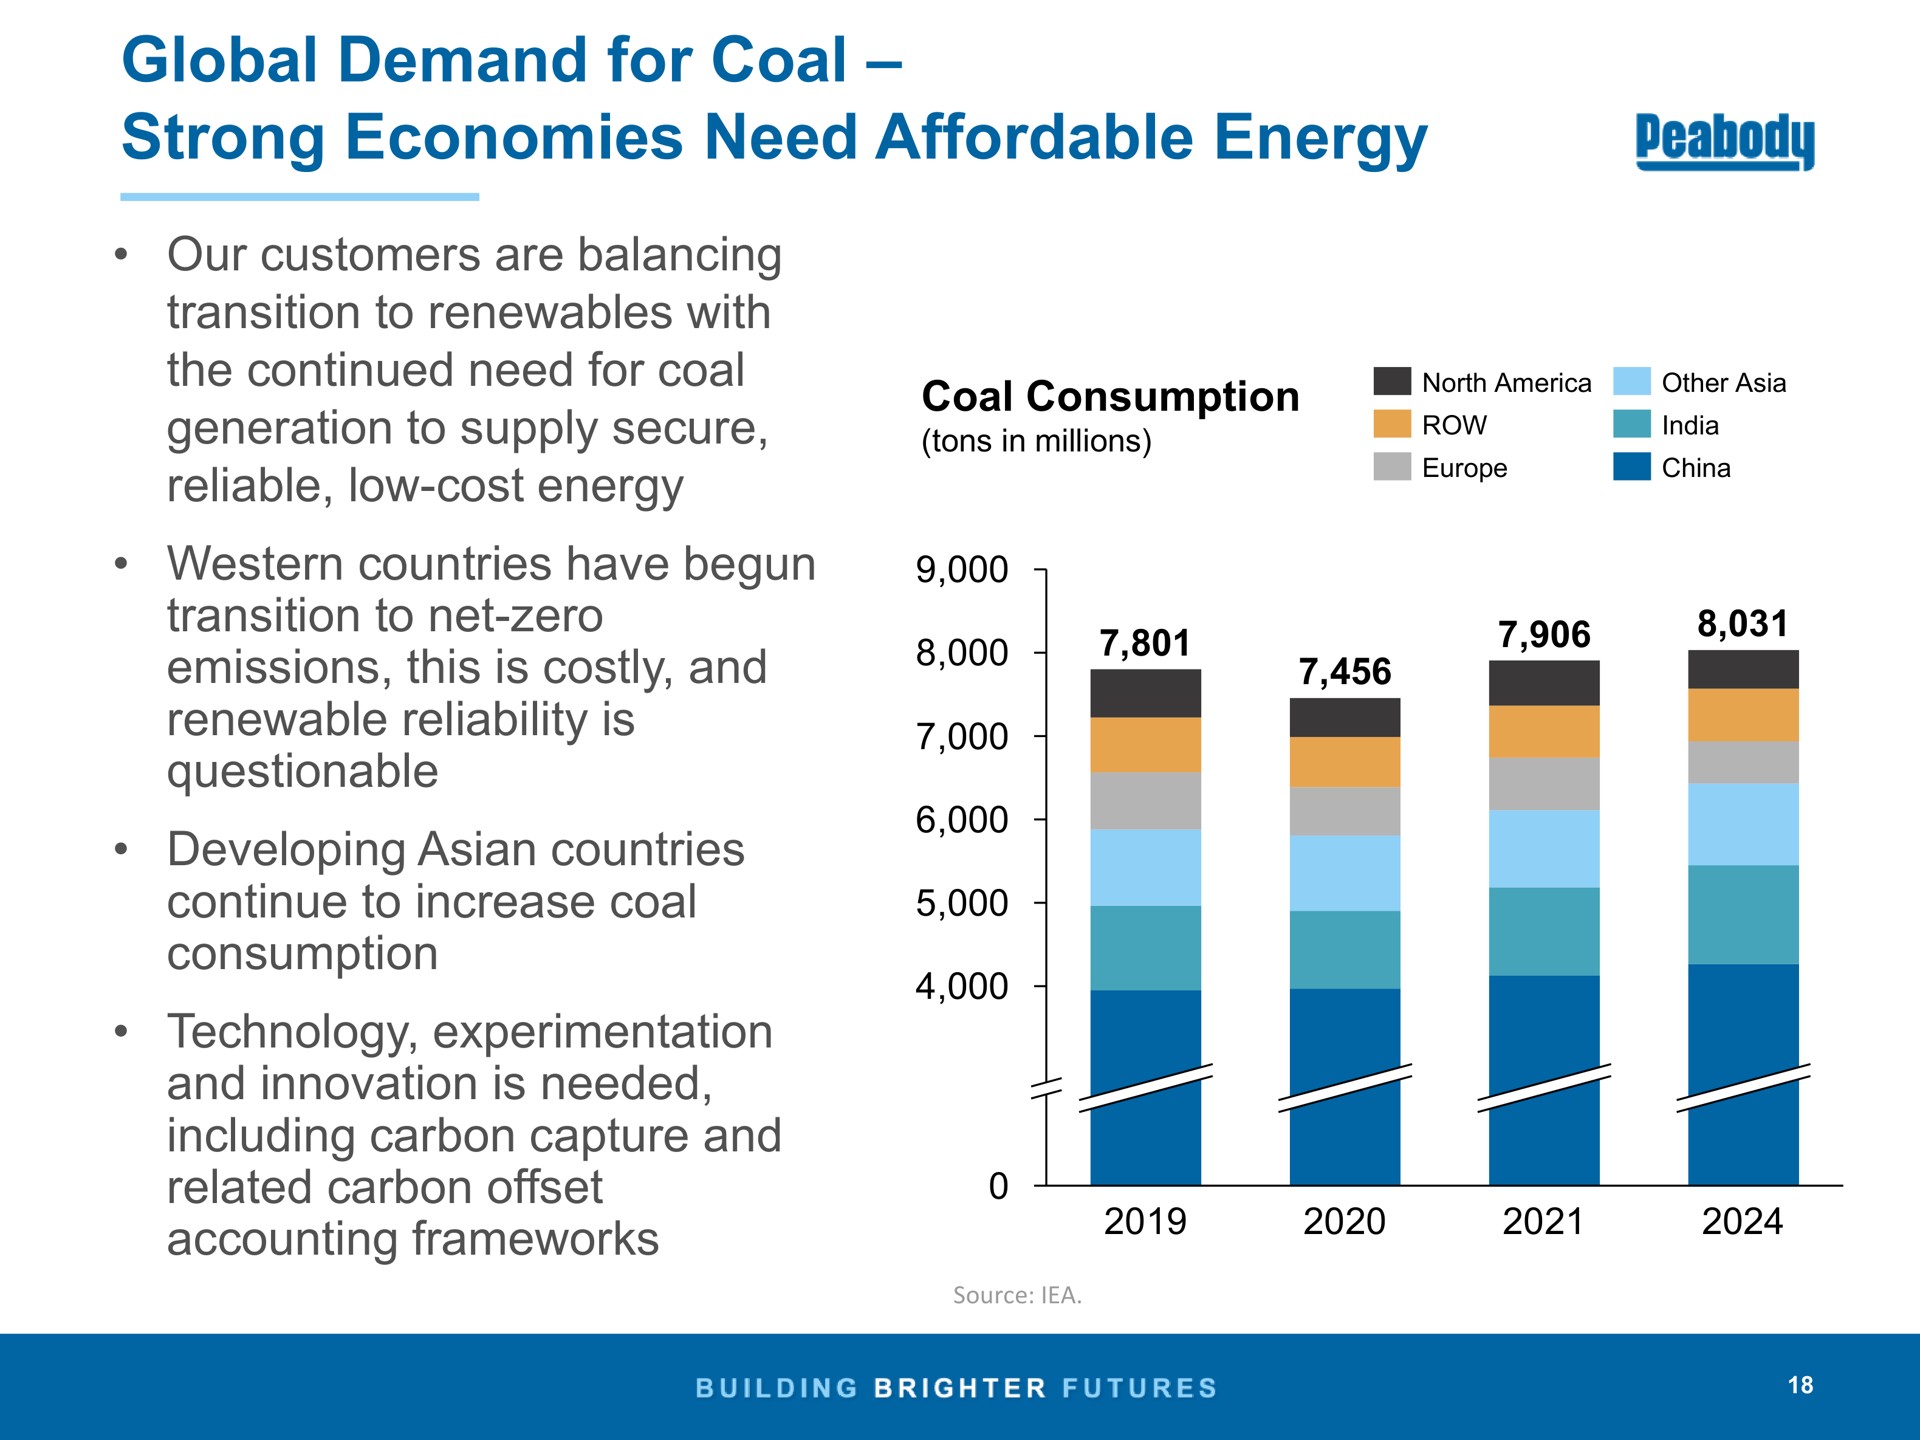 global demand for coal strong economies need affordable energy our customers are balancing transition to with the continued need for coal generation to supply secure reliable low cost energy western countries have begun transition to net zero emissions this is costly and renewable reliability is questionable developing countries continue to increase coal consumption technology experimentation and innovation is needed including carbon capture and related carbon offset accounting frameworks china mum | Peabody Energy